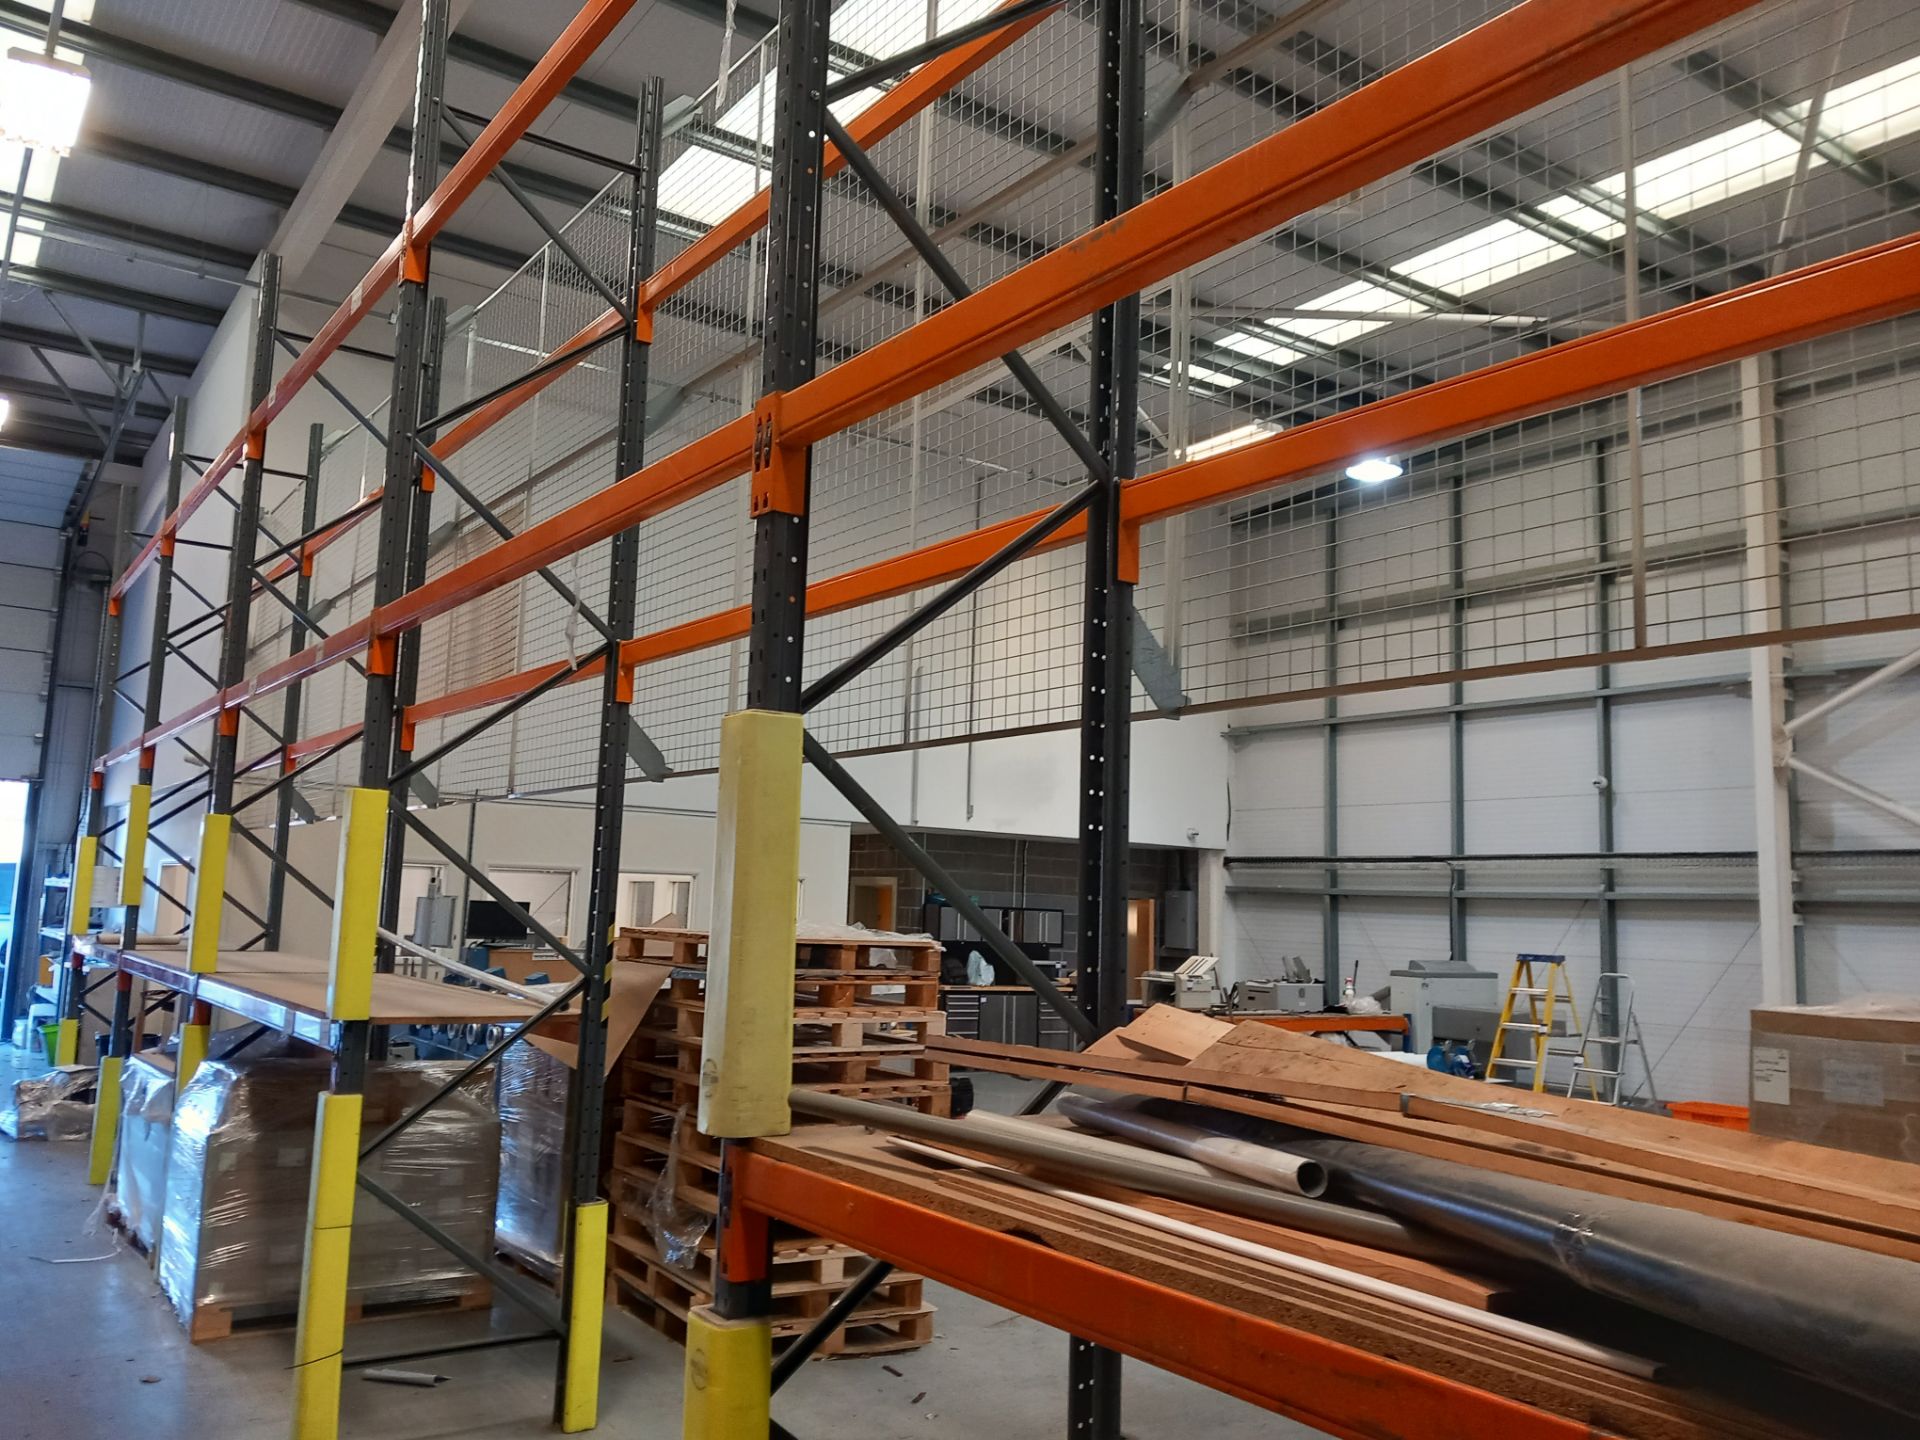 16 Bays of Dexion Speedlock boltless steel pallet racking with spare beams & guard railing & shelf - Image 5 of 9